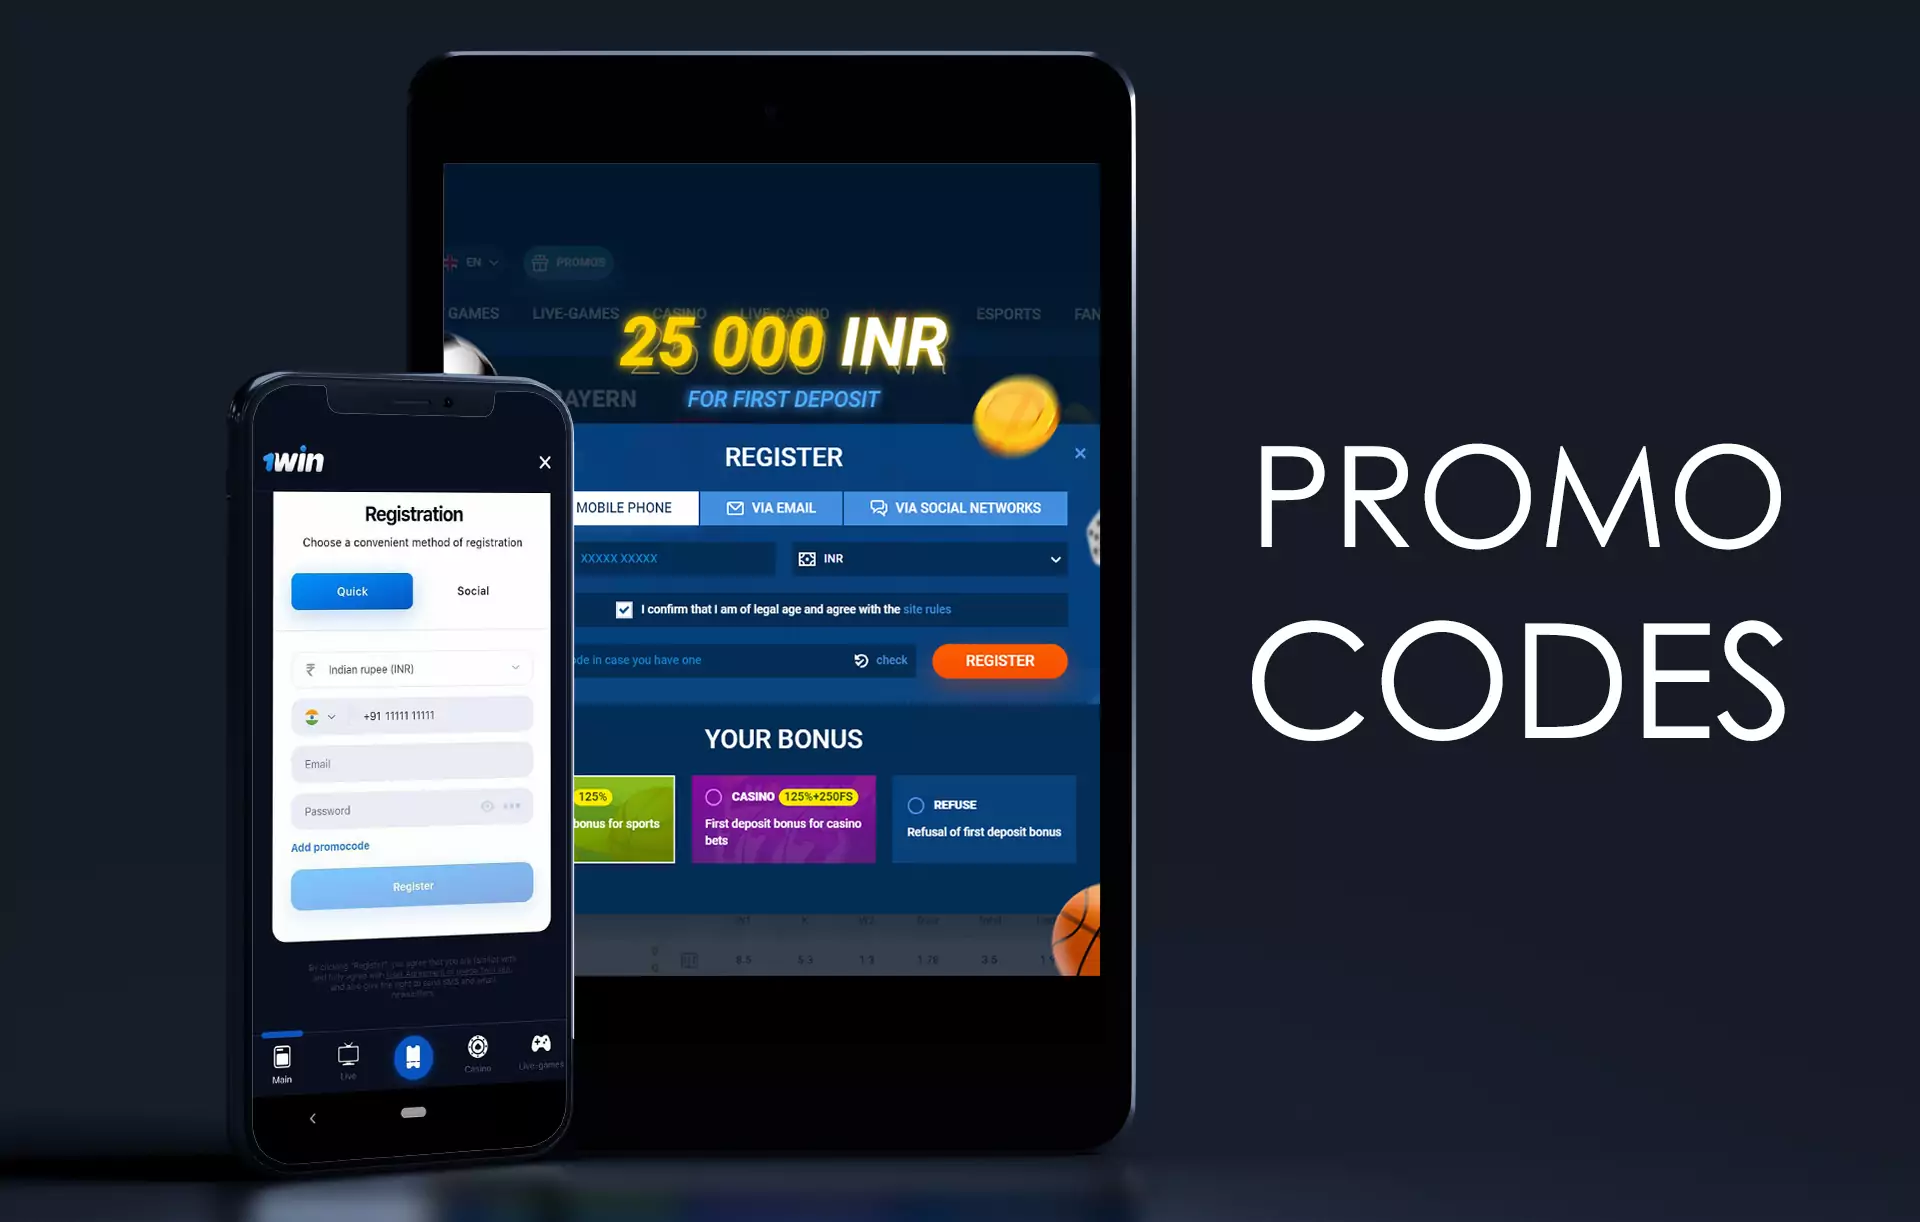 Promo Codes allow you to get extra bonuses on the site for cricket betting.